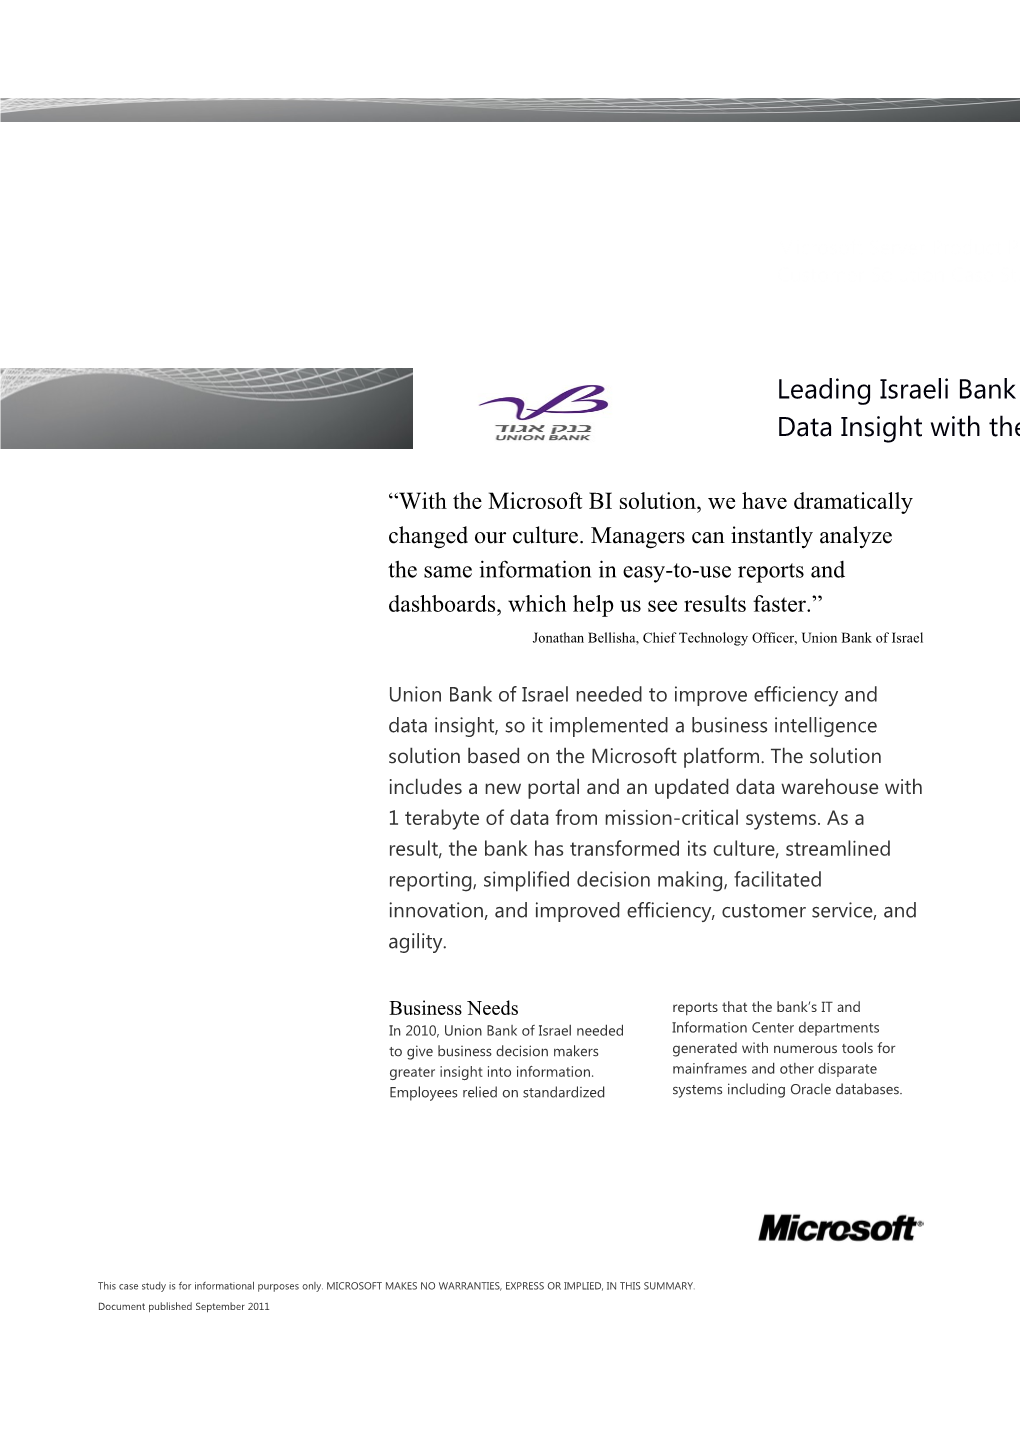 Leading Israeli Bank Transforms Culture and Data Insight with the Microsoft Platform